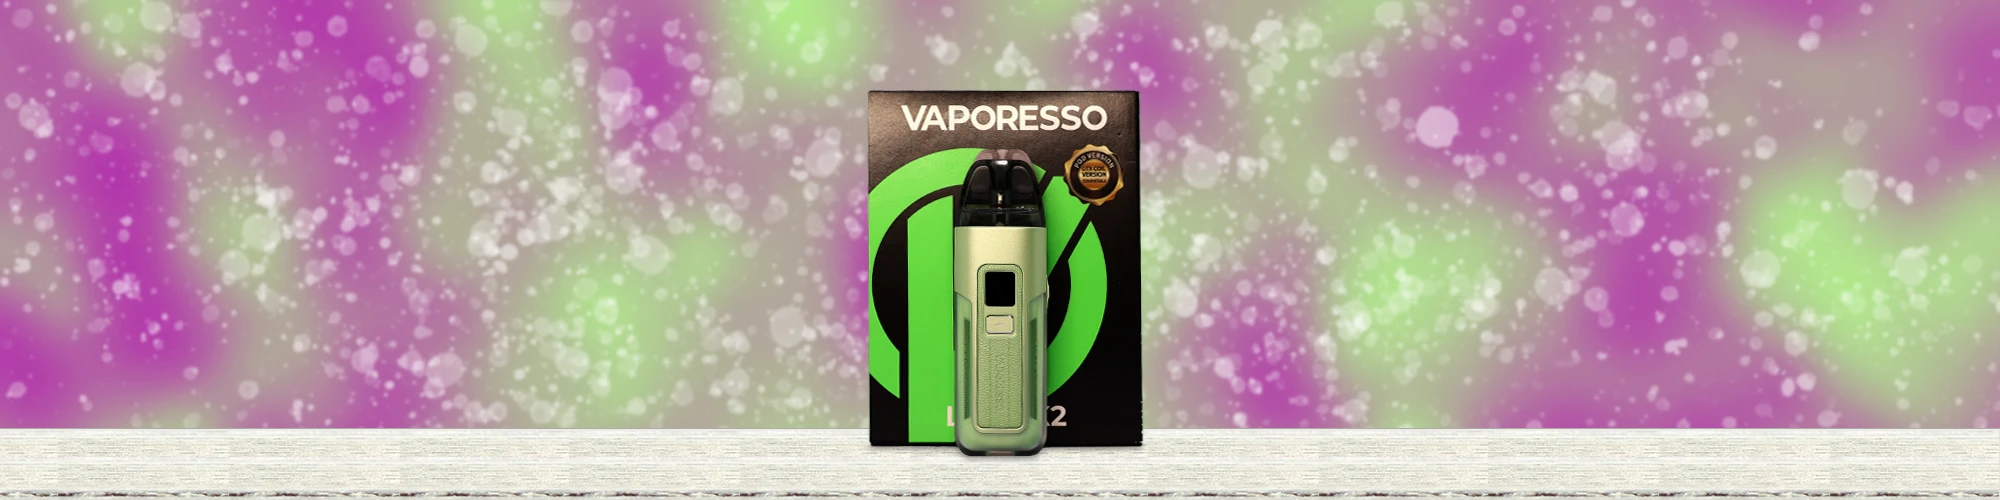 VAPORESSO LUXE X2 Review Main Banner